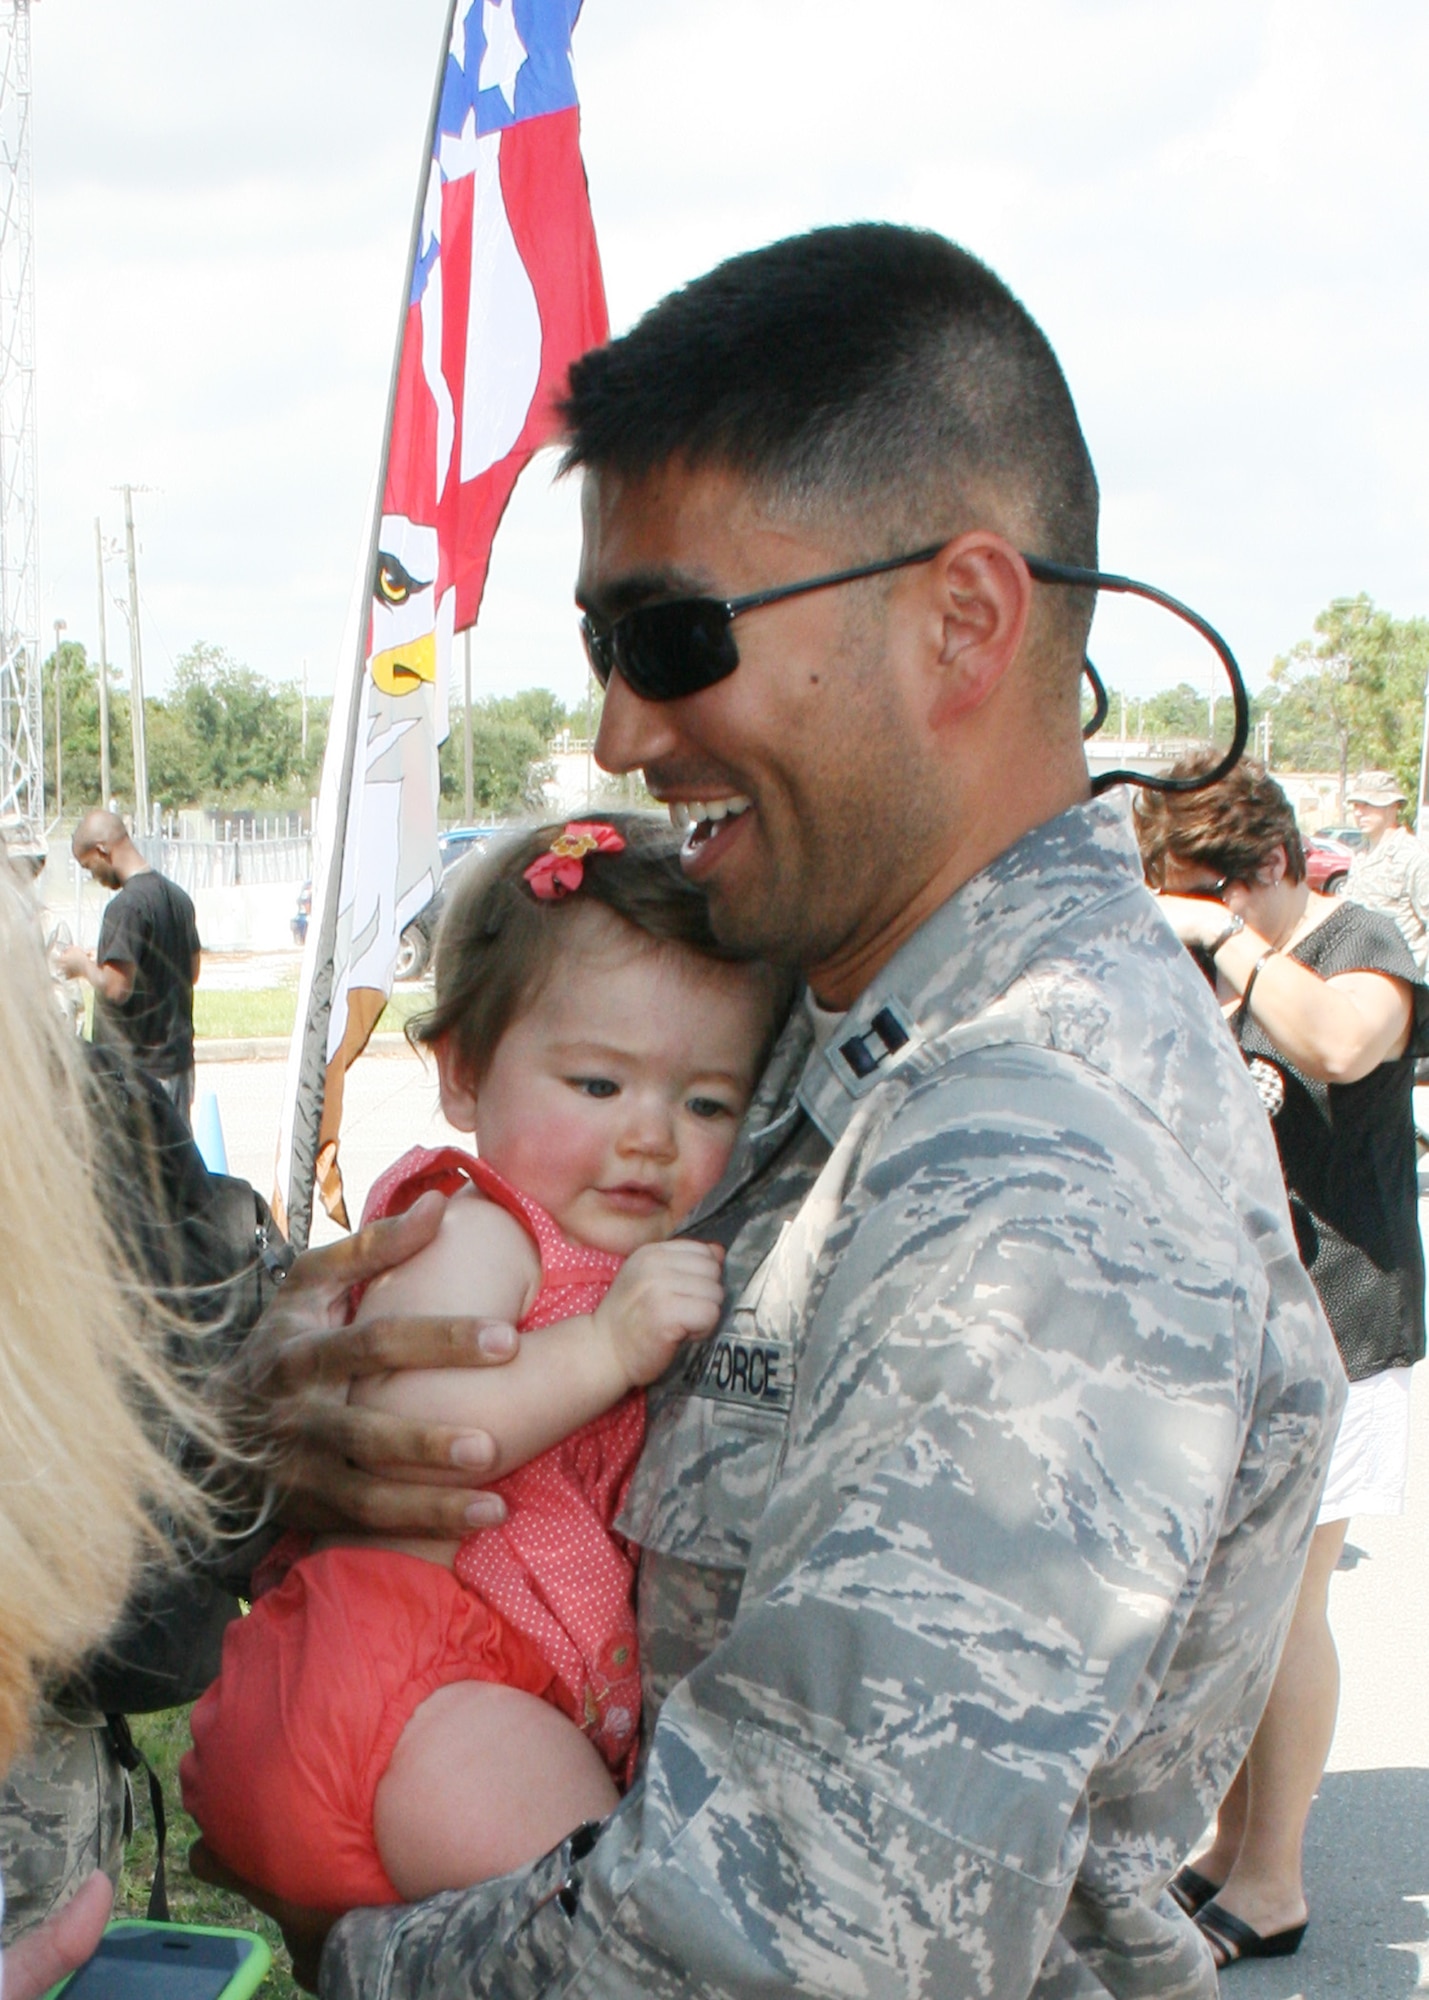 Captain Eric Bein, 728th Air Control Squadron air battle manager, receives a welcome home hug after returning from his first Operation Iraqi Freedom deployment with his unit Sept. 21. As one of the Air Combat Command’s four unique Control and Reporting Centers, more than 150 members of the 728th ACS provided command and control of joint air operations using surveillance, identification, weapons control, battle management and theater data links while overseas. (U.S. Air Force photo/2nd Lt. Andrew Caulk)